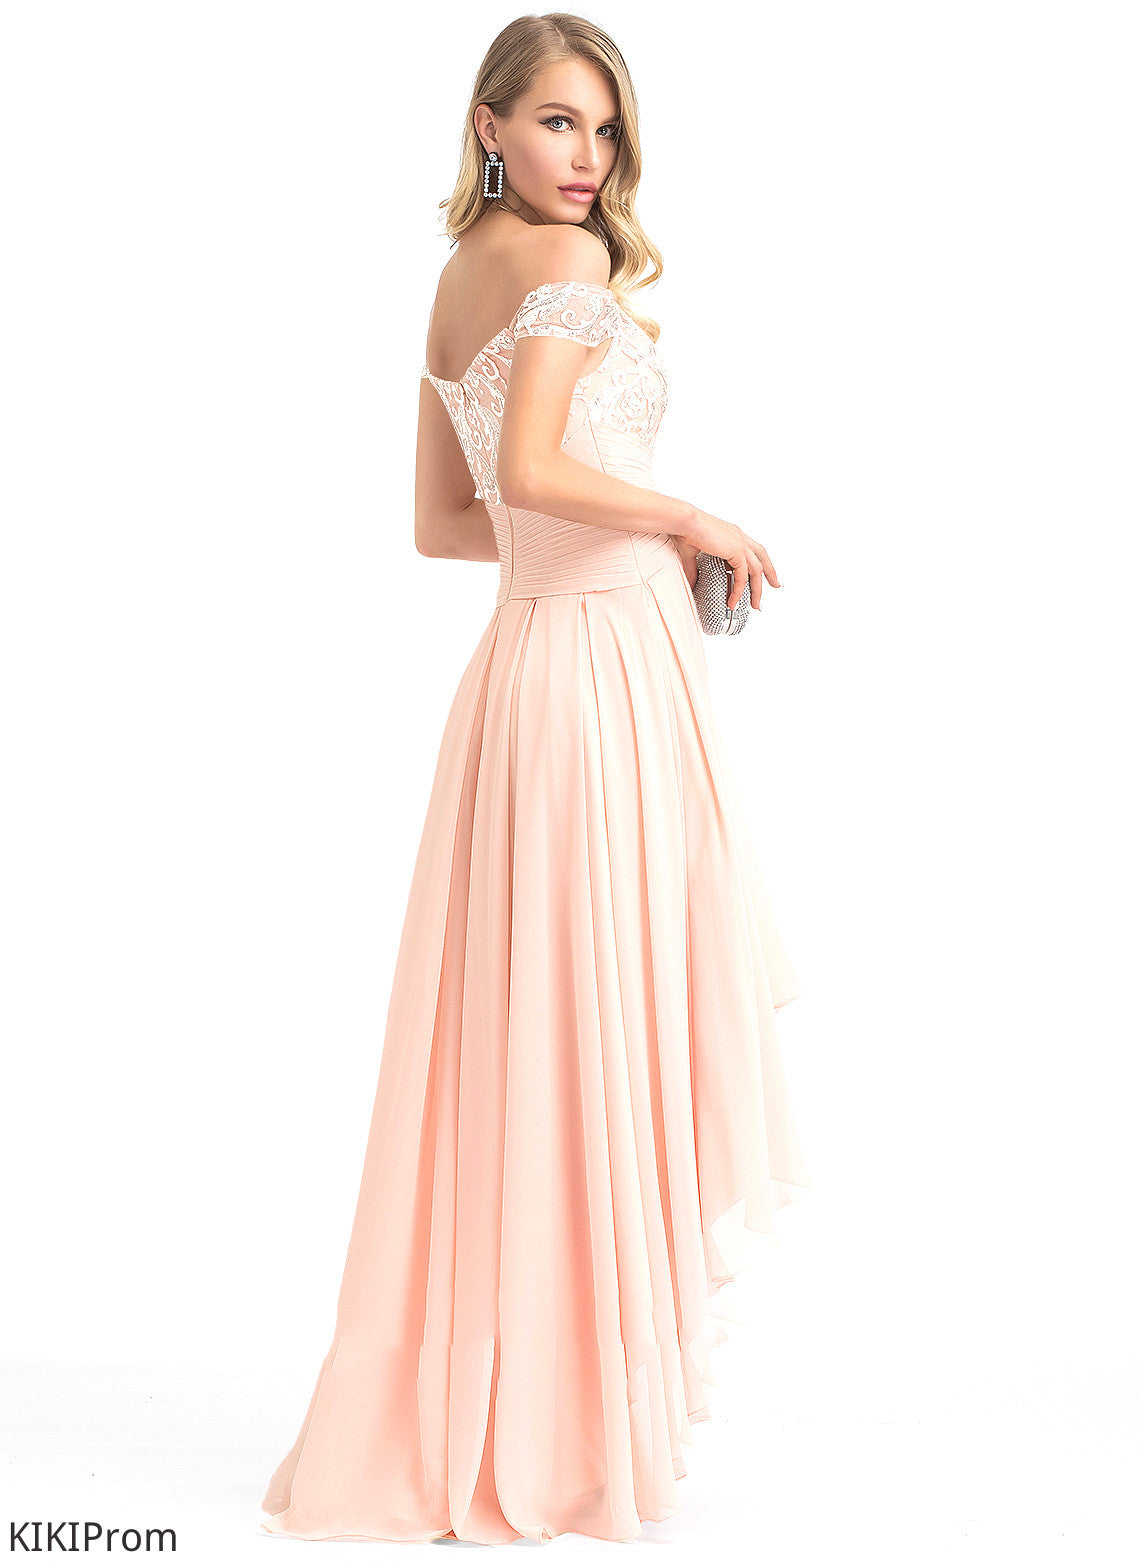 Chiffon Prom Dresses A-Line Sequins With Lyric Asymmetrical Off-the-Shoulder